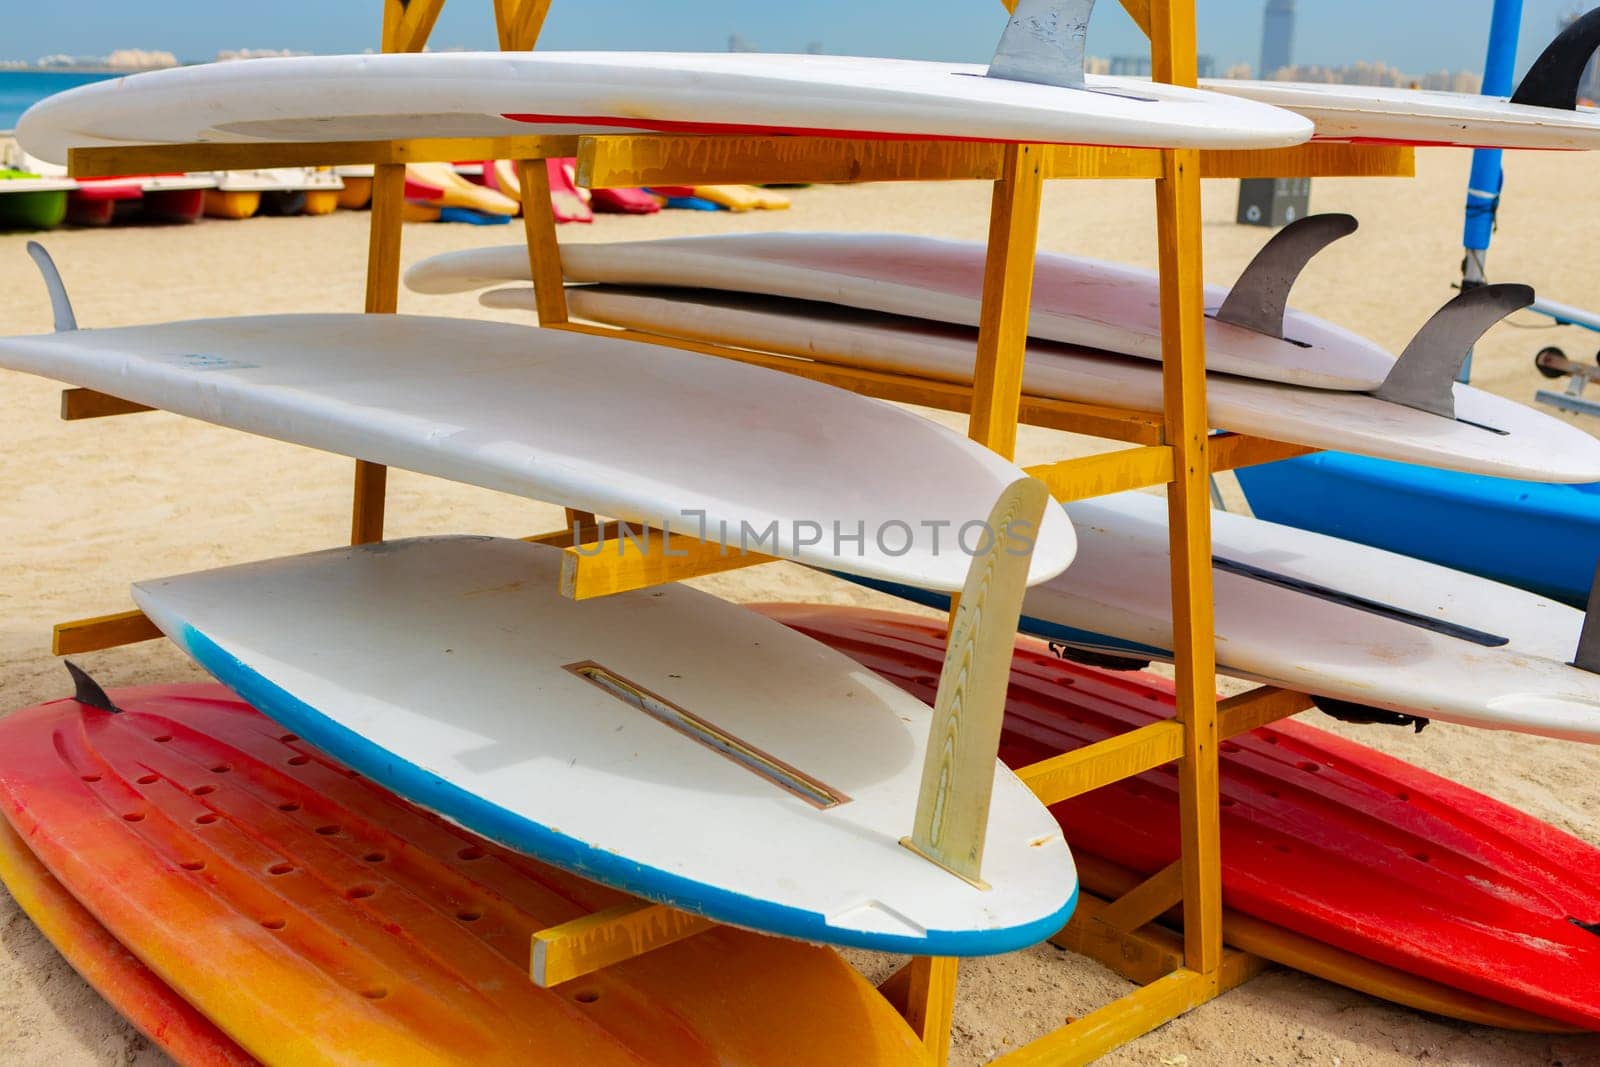 Surfboards stacked on the rack on a beach, close up